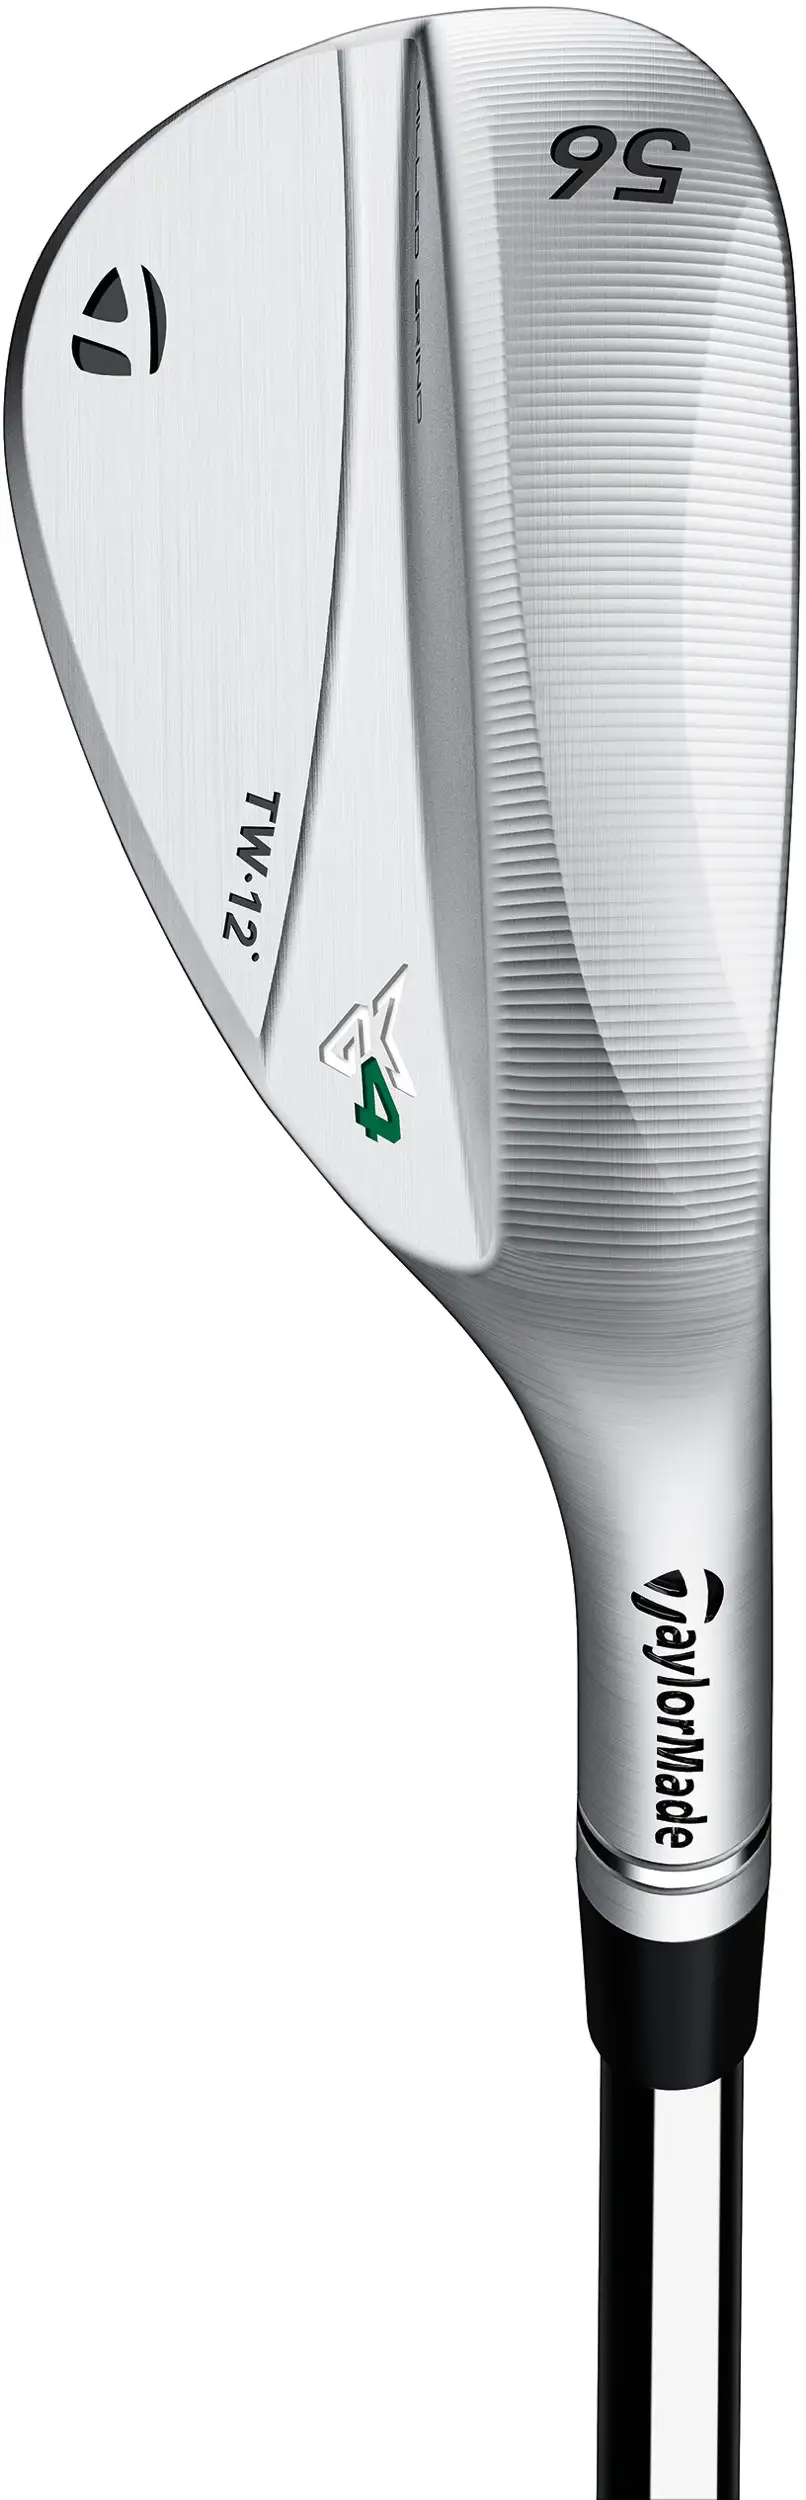 TaylorMade Milled Grind 4 Tiger Woods Chrome Wedge